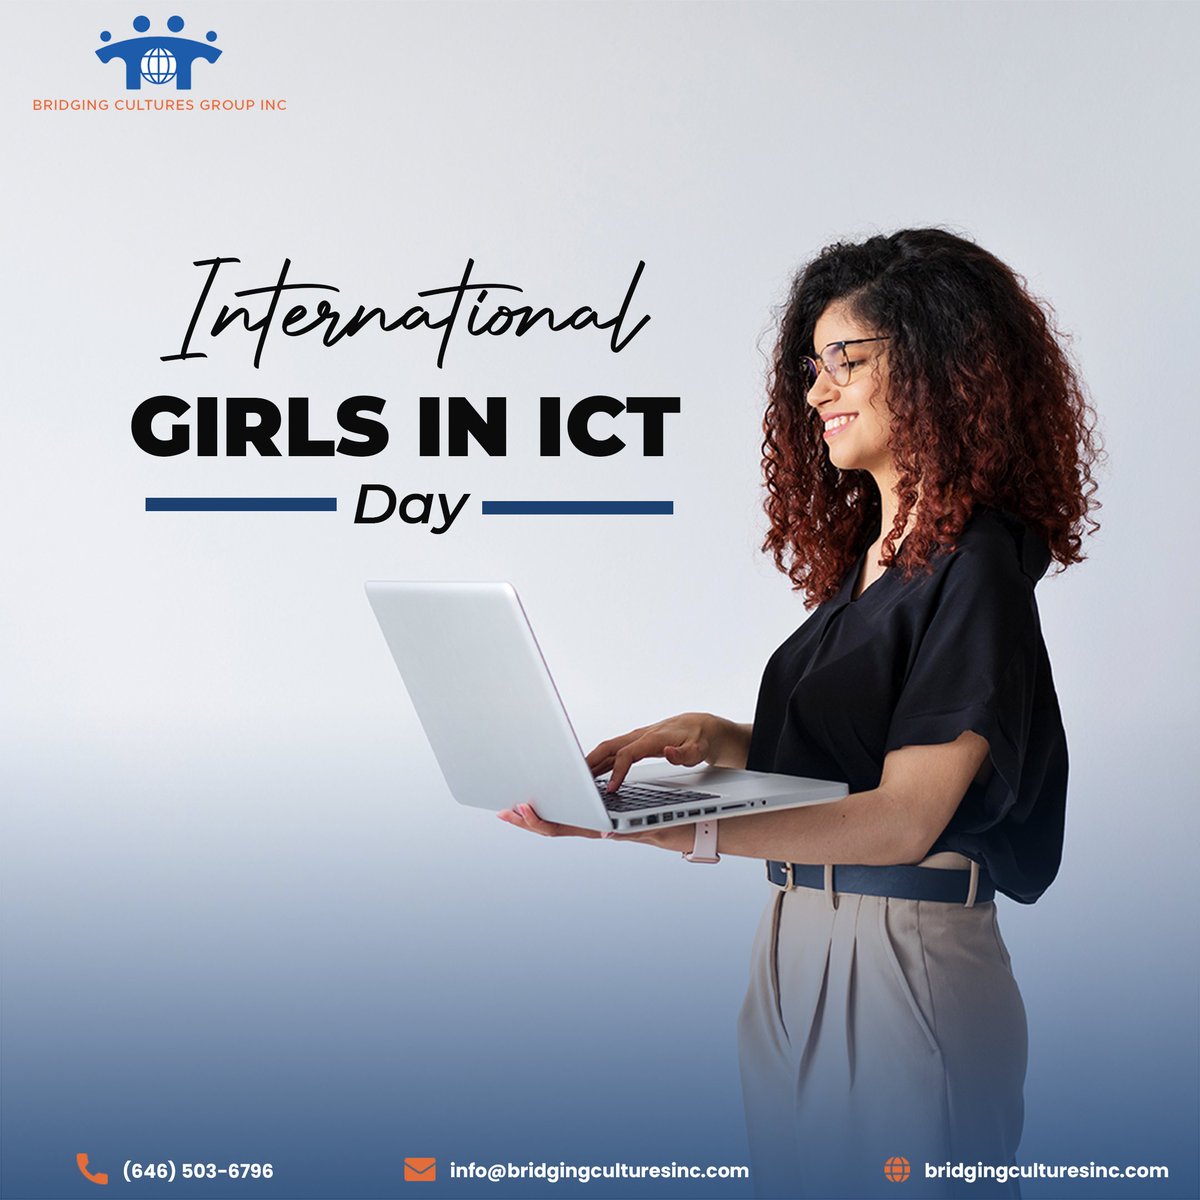 On International Girls in ICT Day, Bridging Cultures Group celebrates the young women who are leading innovation in technology. We champion their drive and creativity, as they pave the way for a more inclusive and diverse tech industry.

#BCG #DEI #GirlsInICTDay #TechDiversity